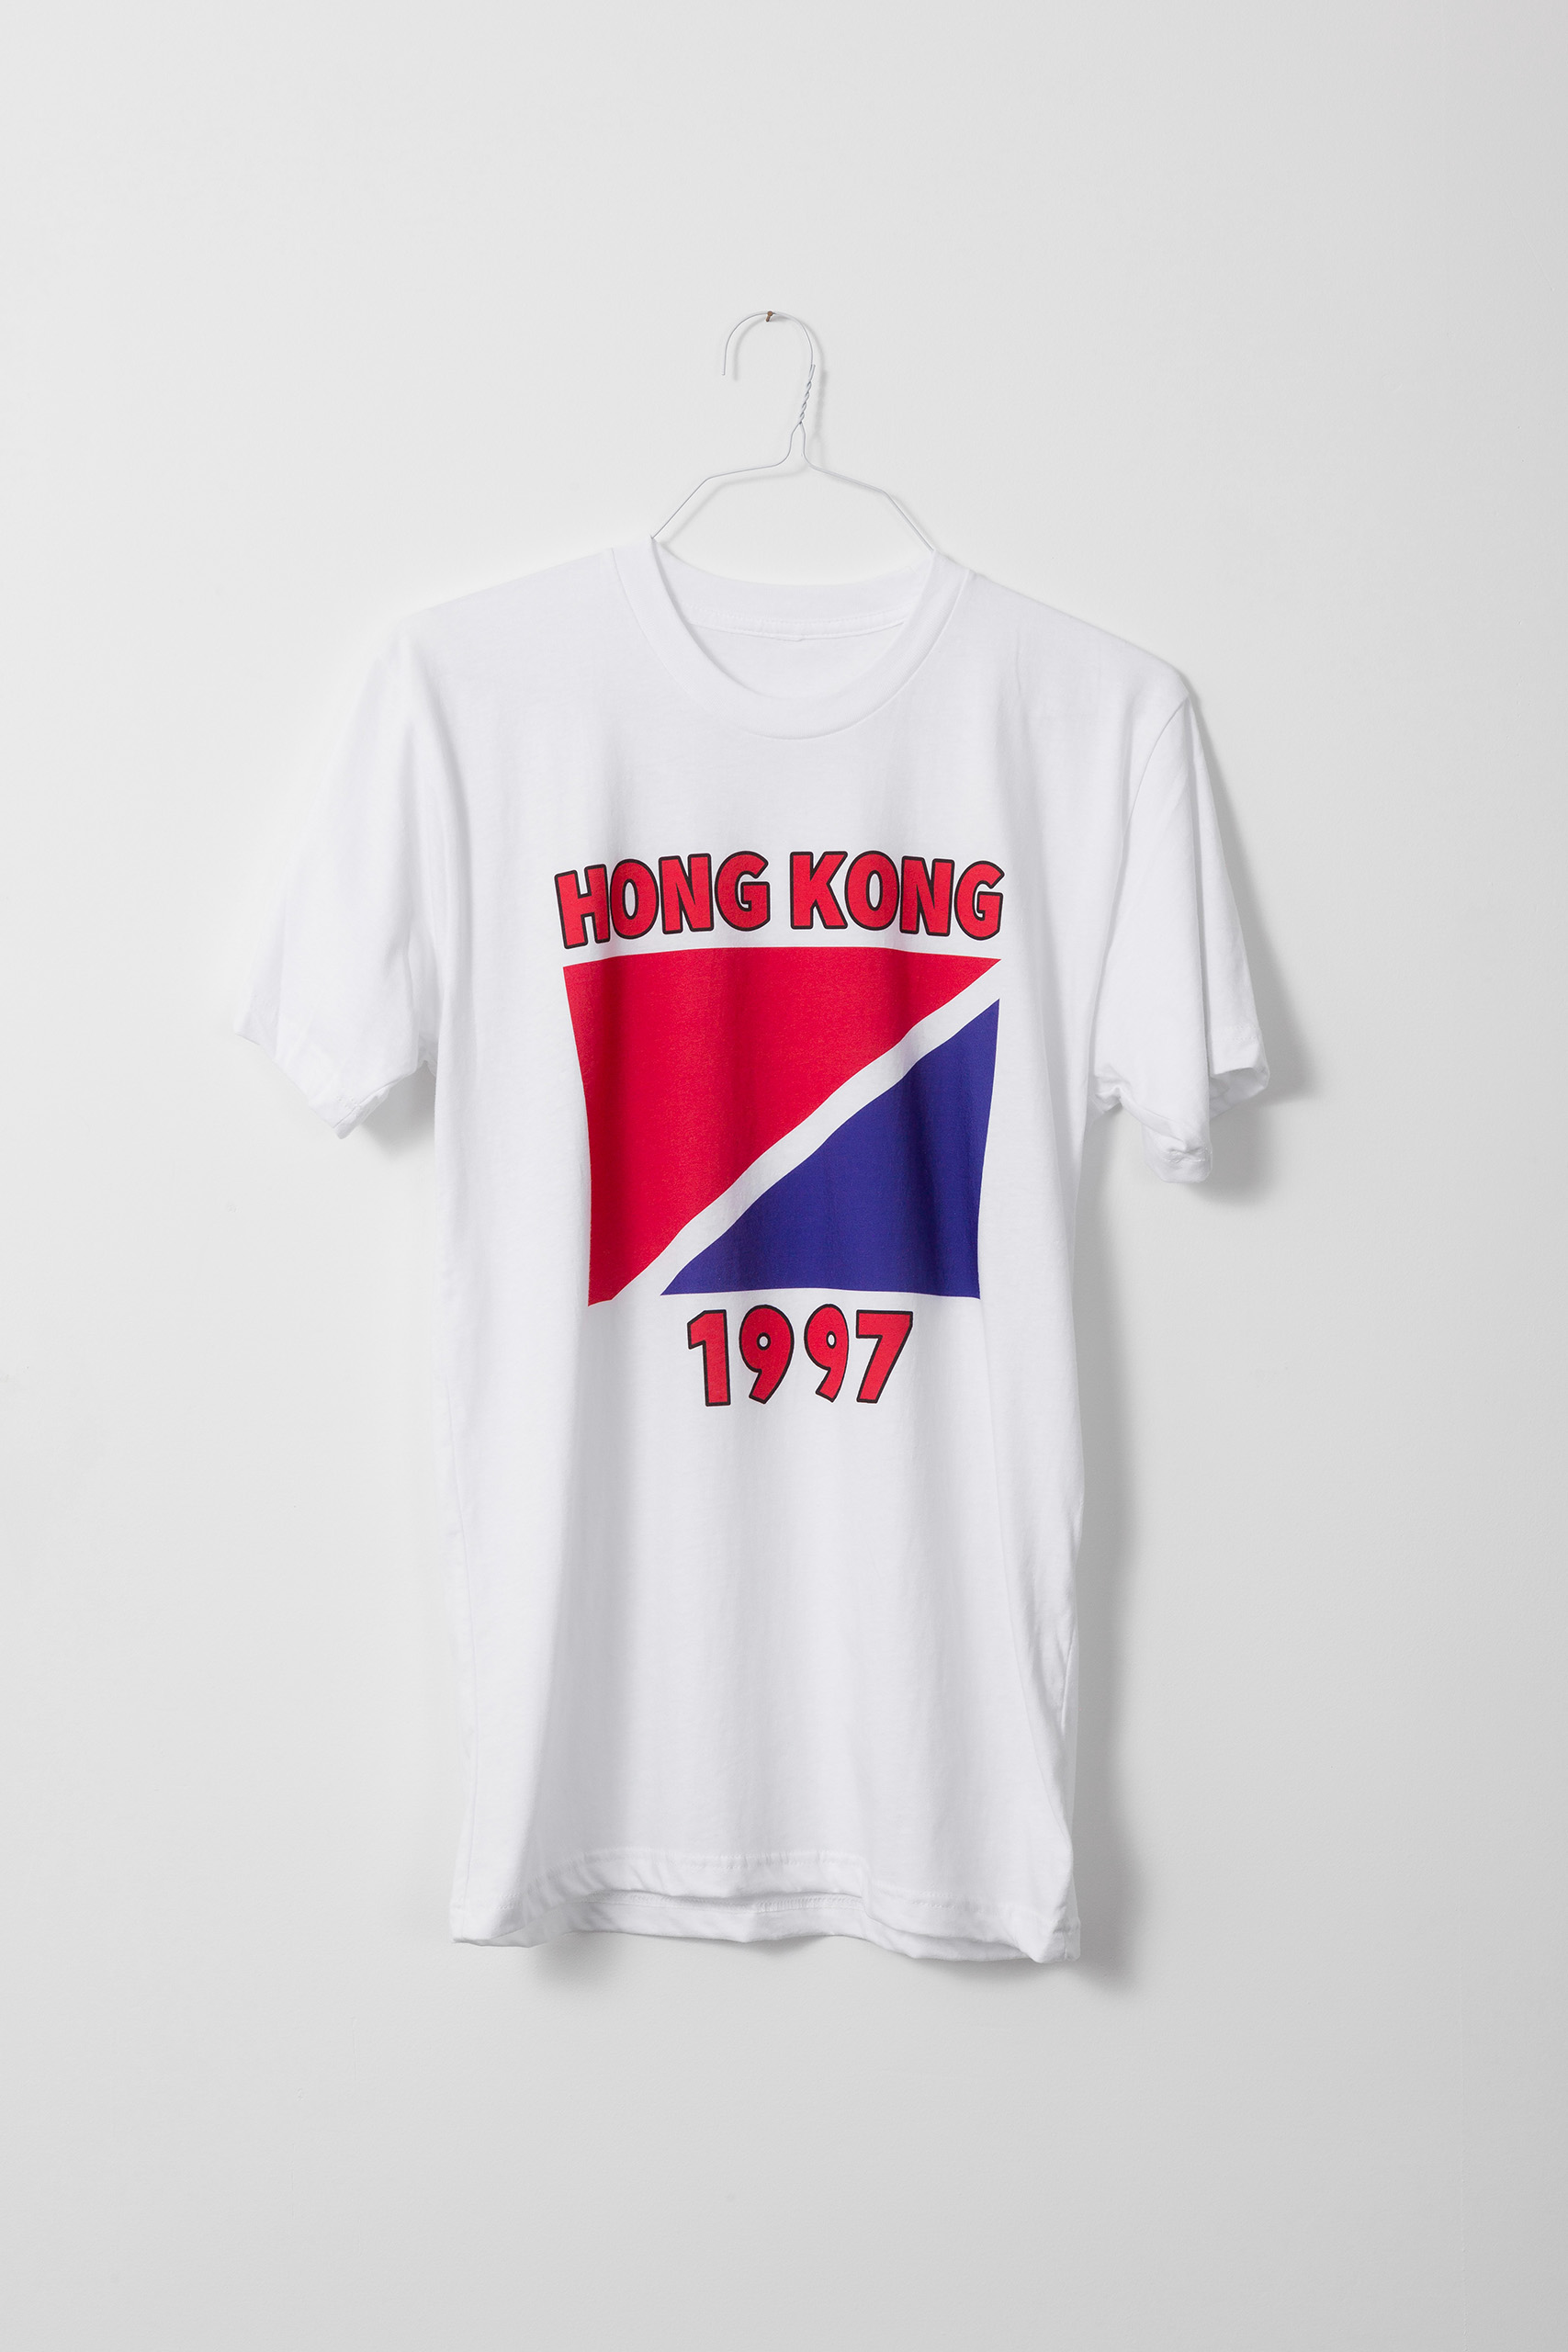 White t-shirt with a flag diagonally split between red and blue, with "HONG KONG" above and "1997" below